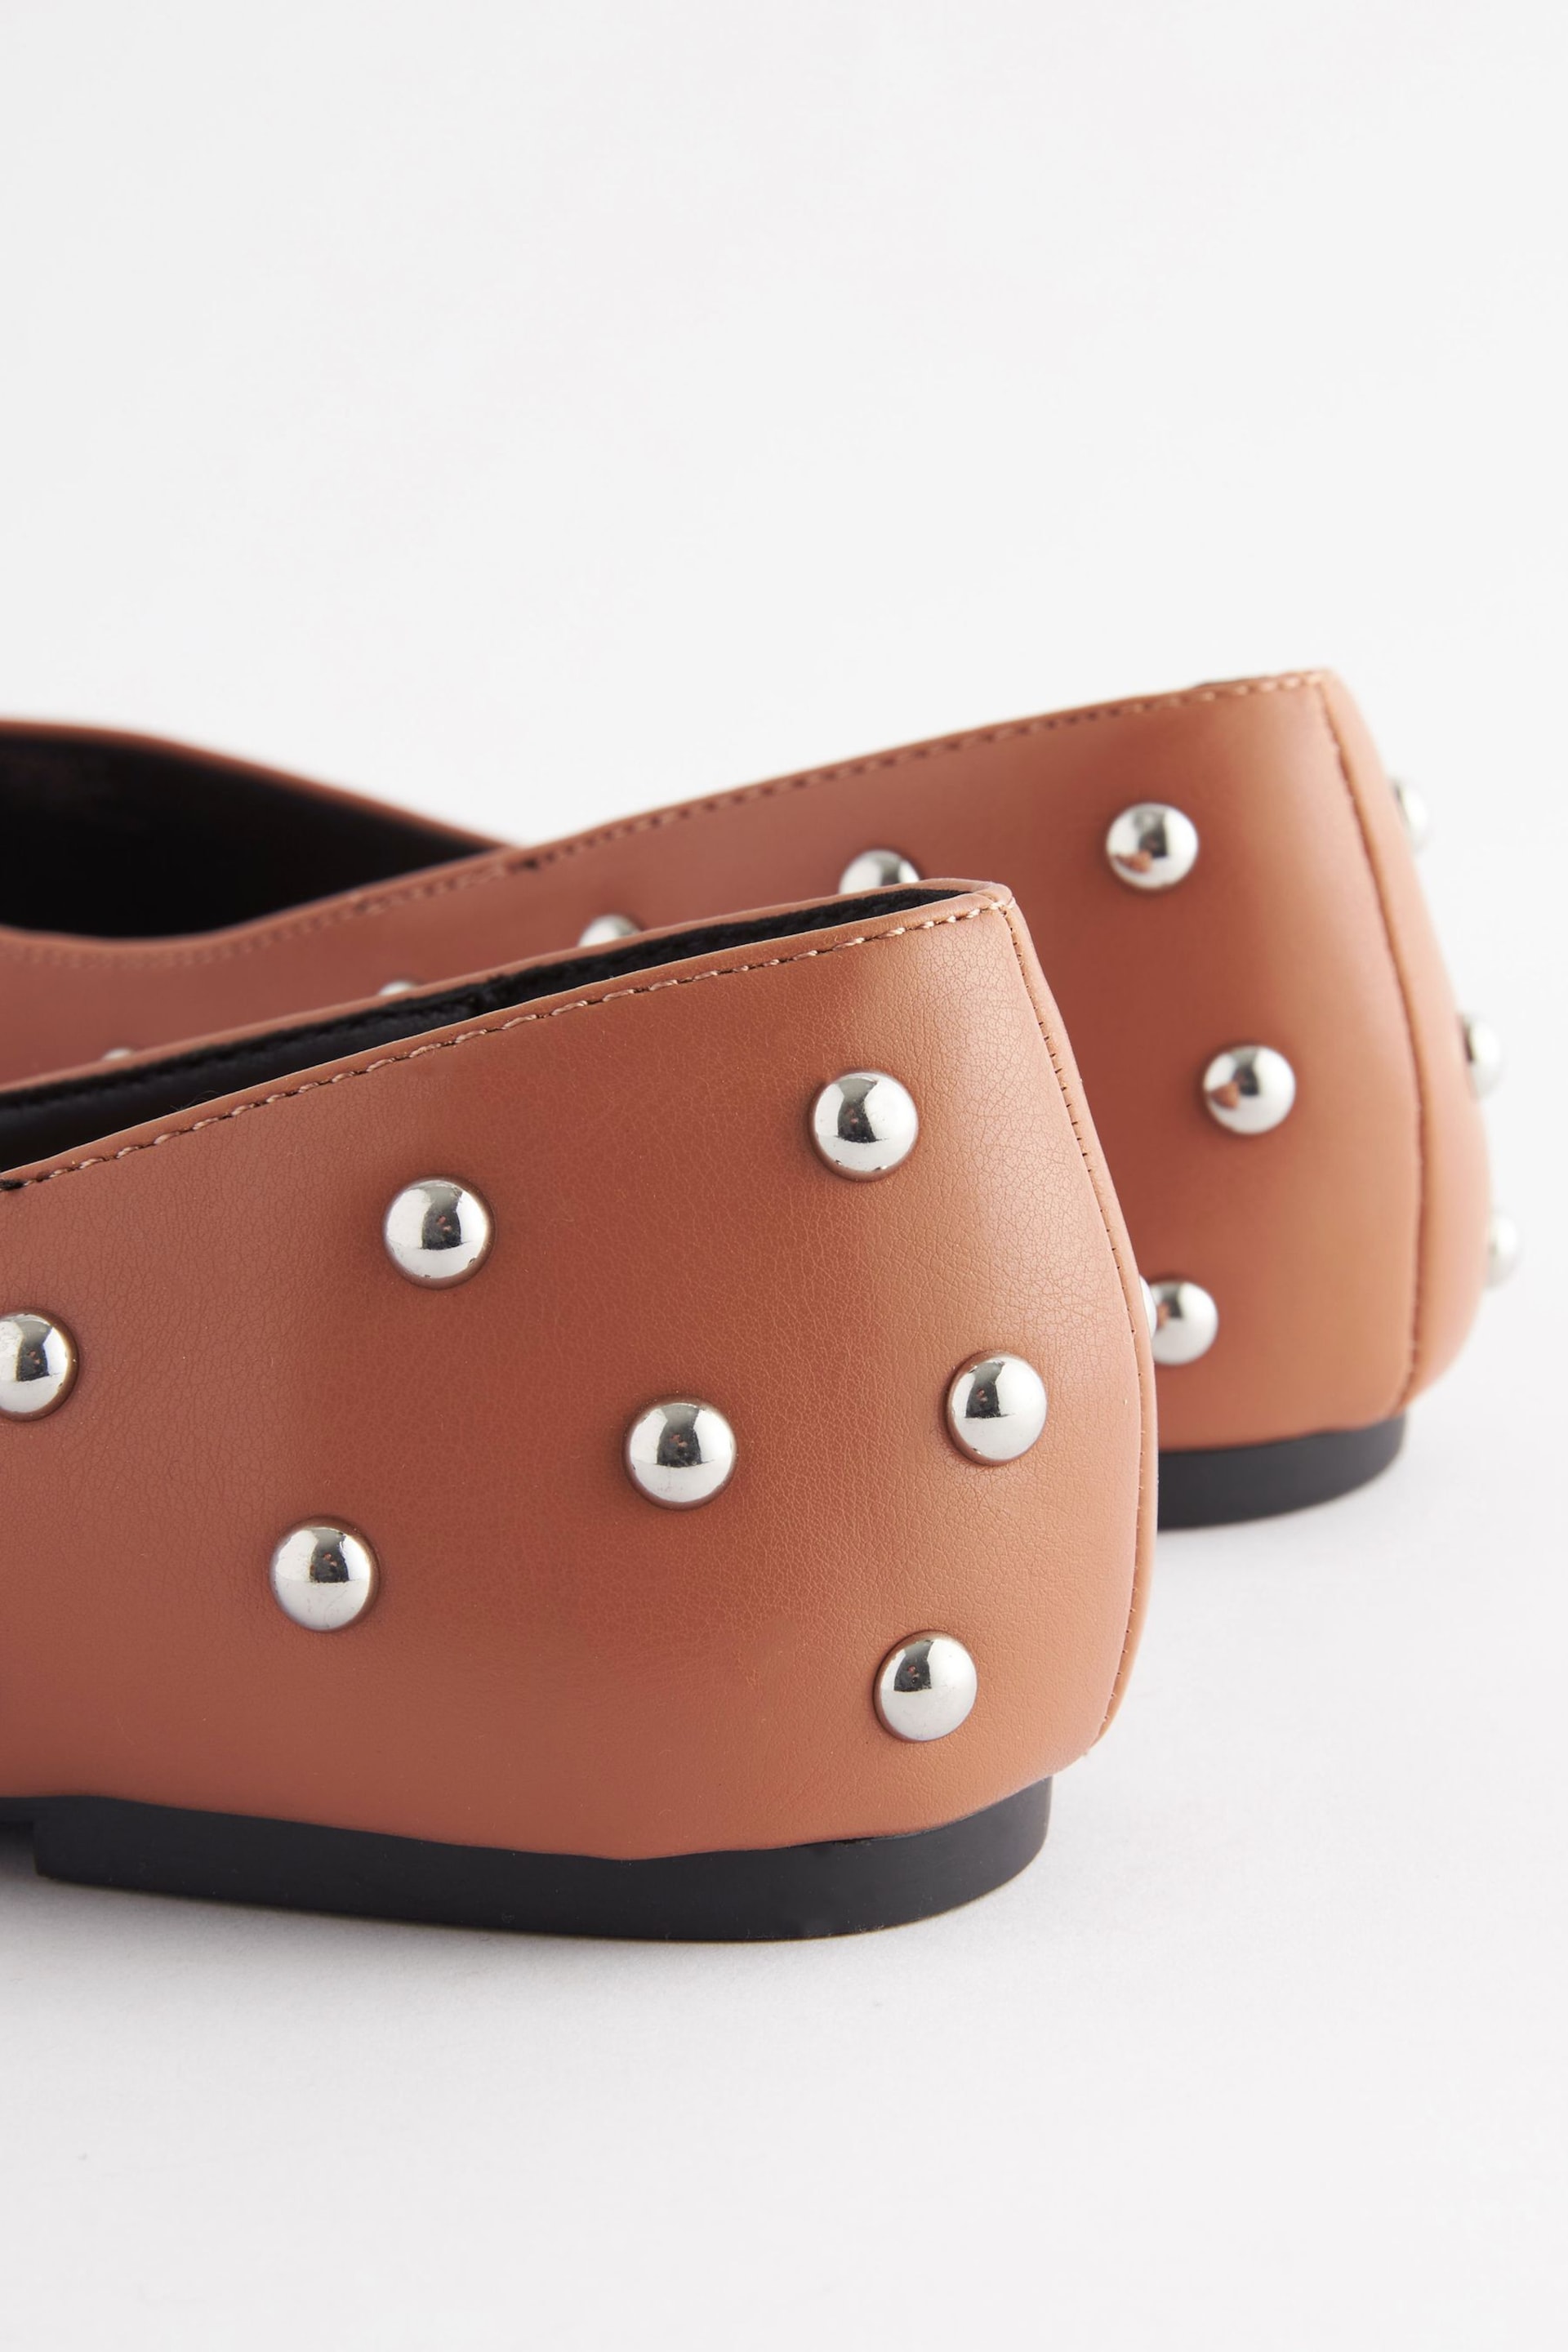 Camel Brown Forever Comfort® Studded Point Toe Flat Shoes - Image 5 of 6